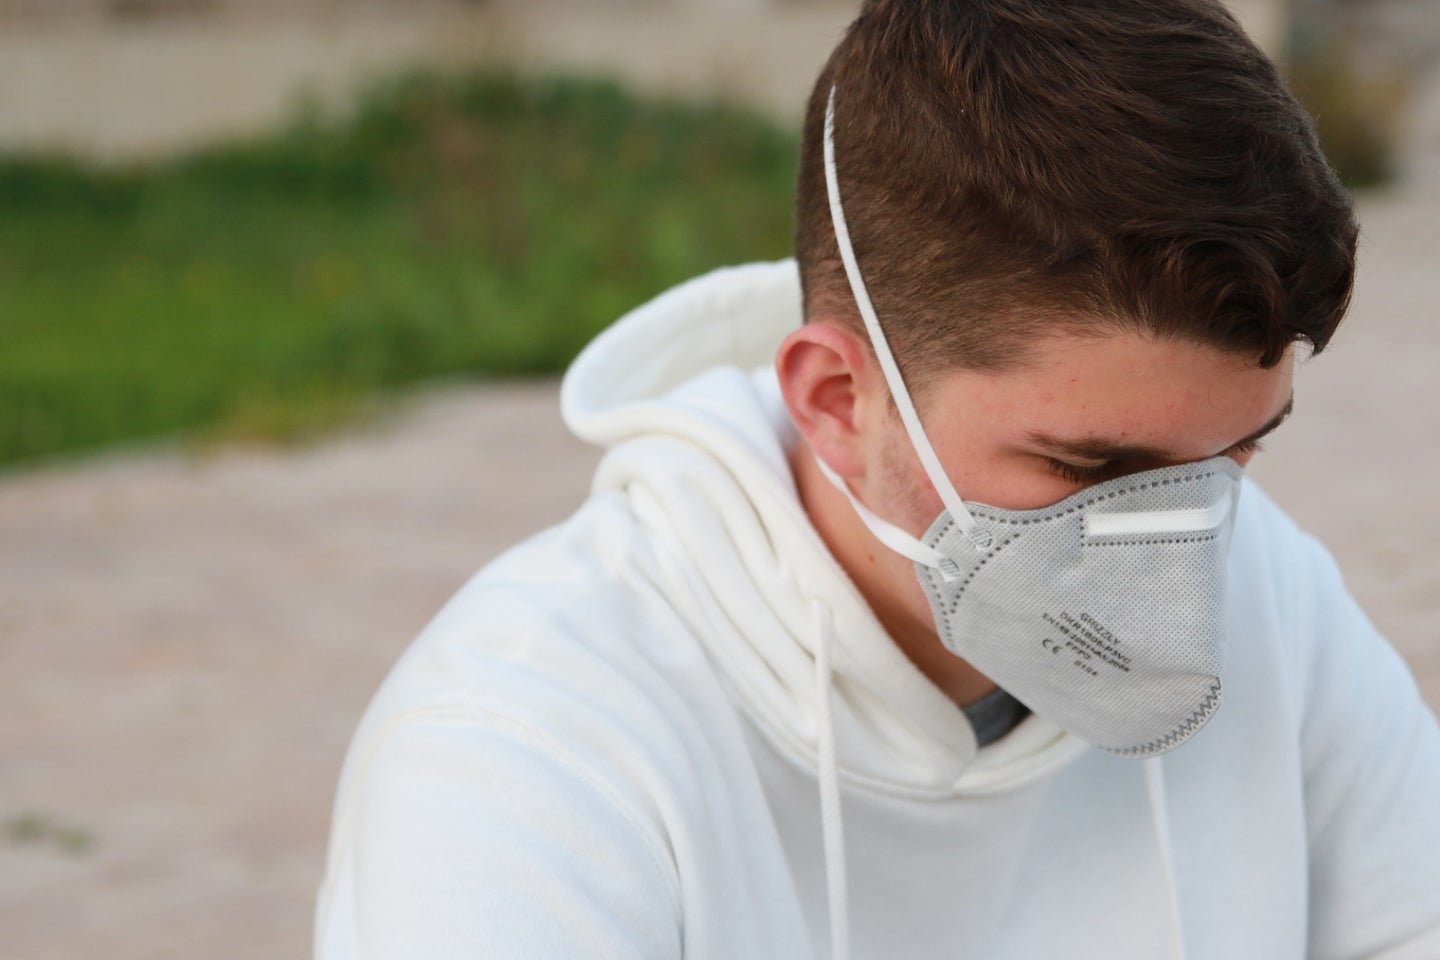 A long COVID patient with short brown hair and a white sweatshirt wearing a respirator mask while sitting on the street